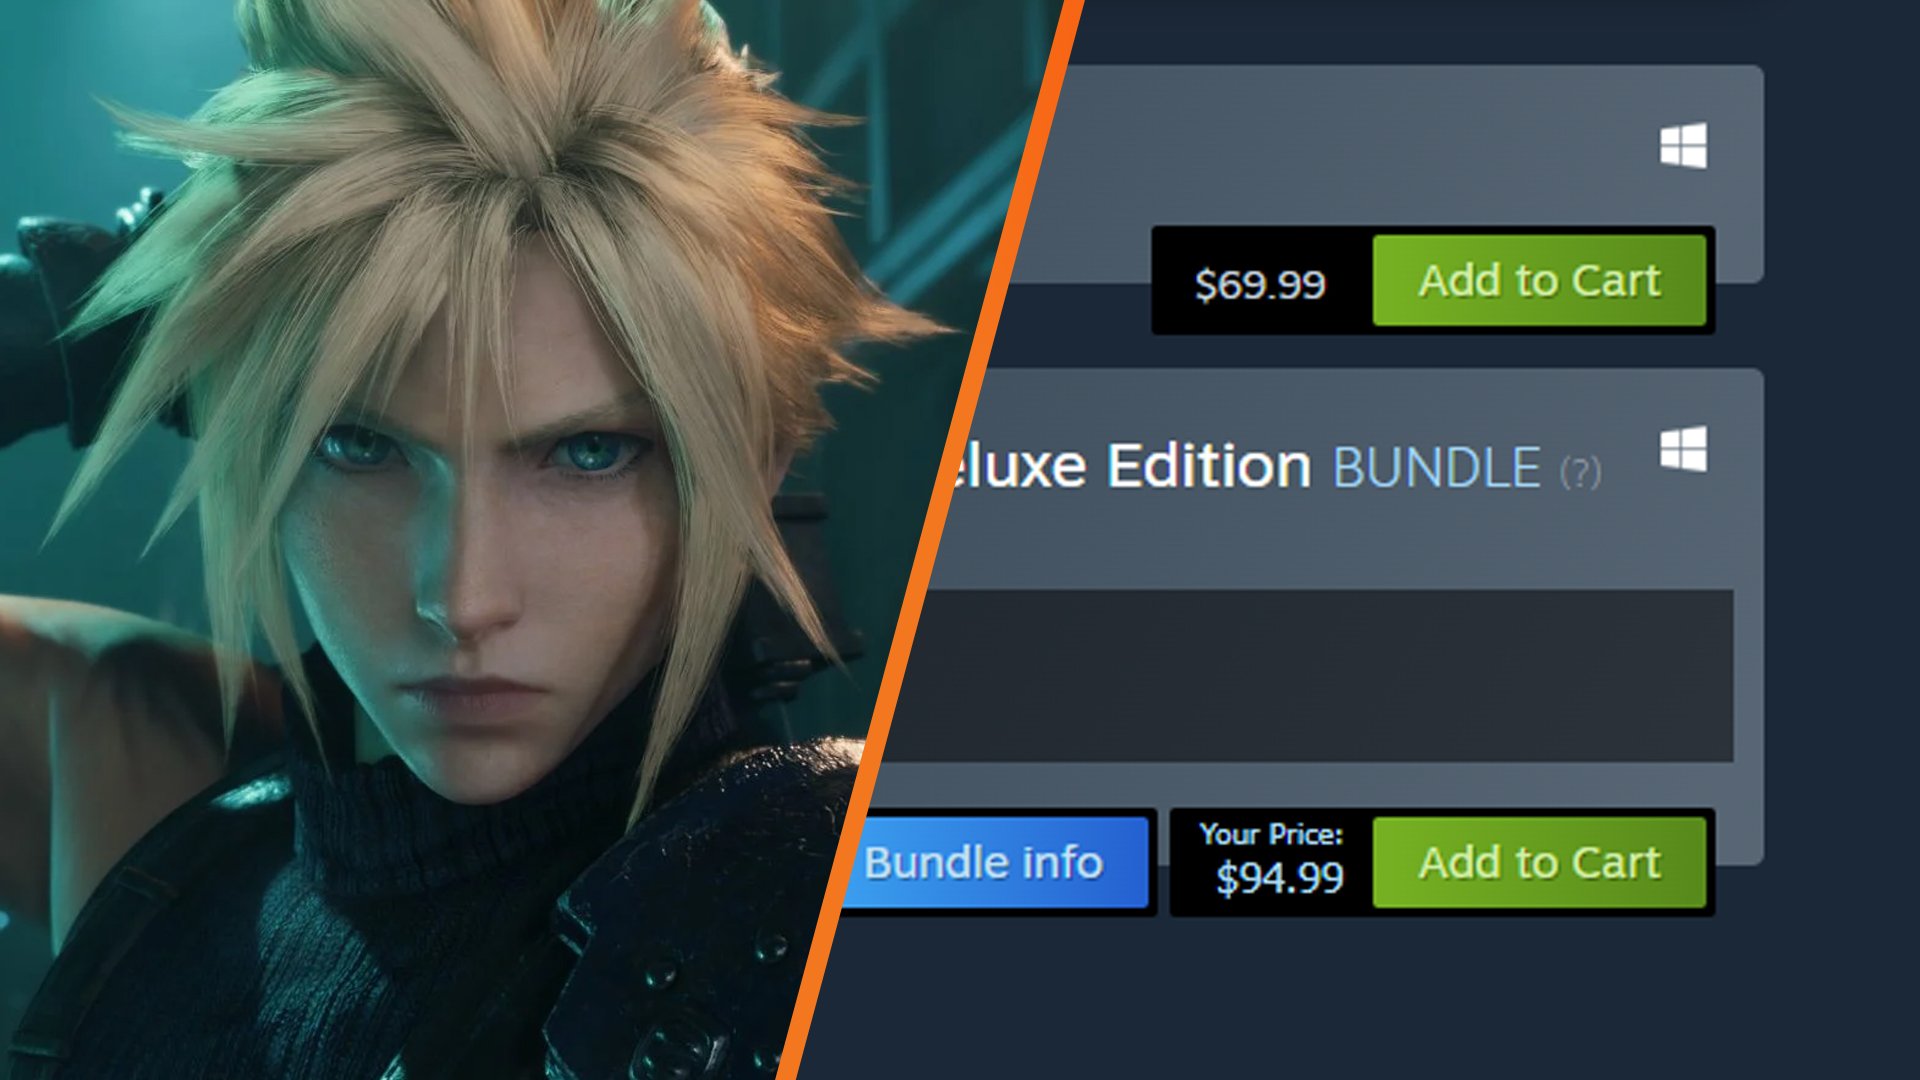 $70 pricing is coming to PC, starting with Square Enix’s next games | VGC